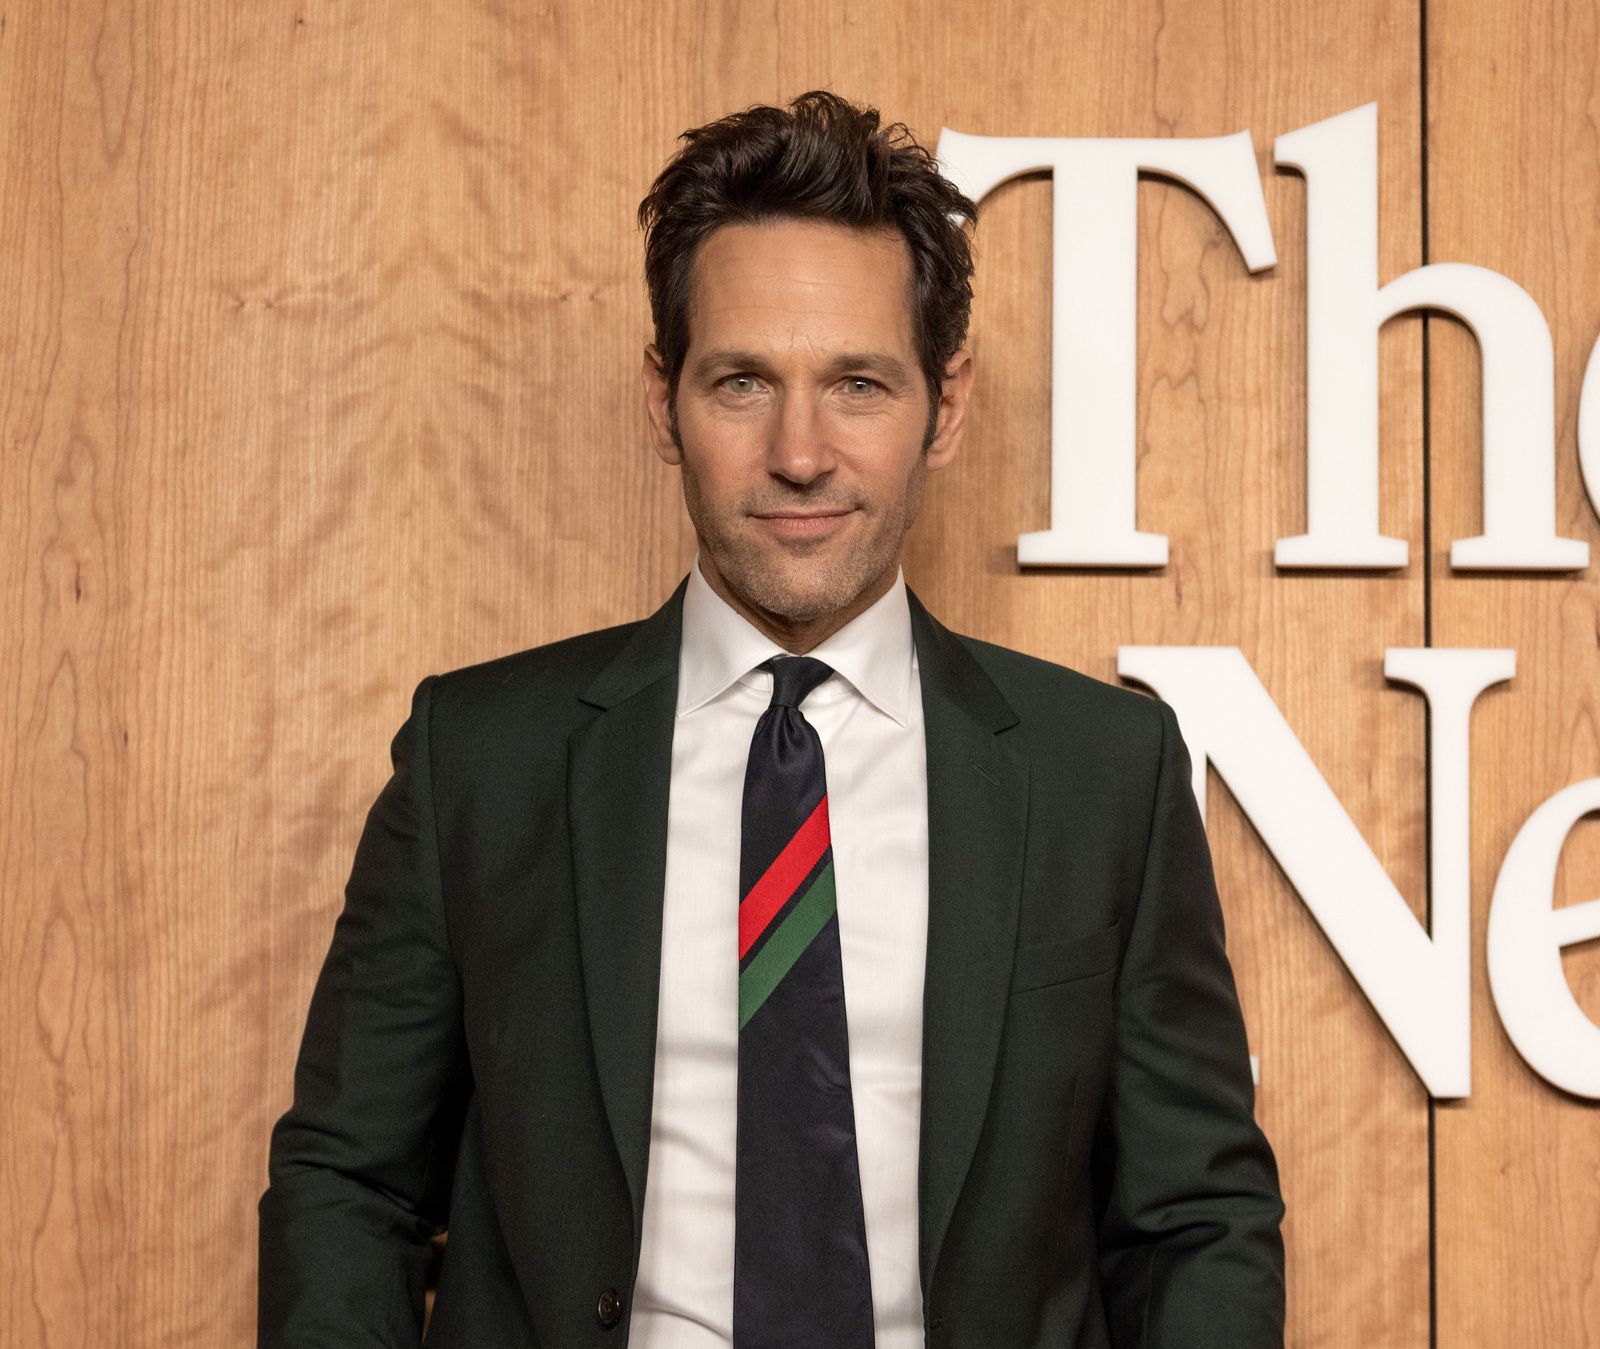 S10 Ep48: 11/10/21 - Best Reactions To Paul Rudd Being People’s 2021 ‘Sexiest Man Alive’: ‘That Wholesome Gem Has Been Fine”